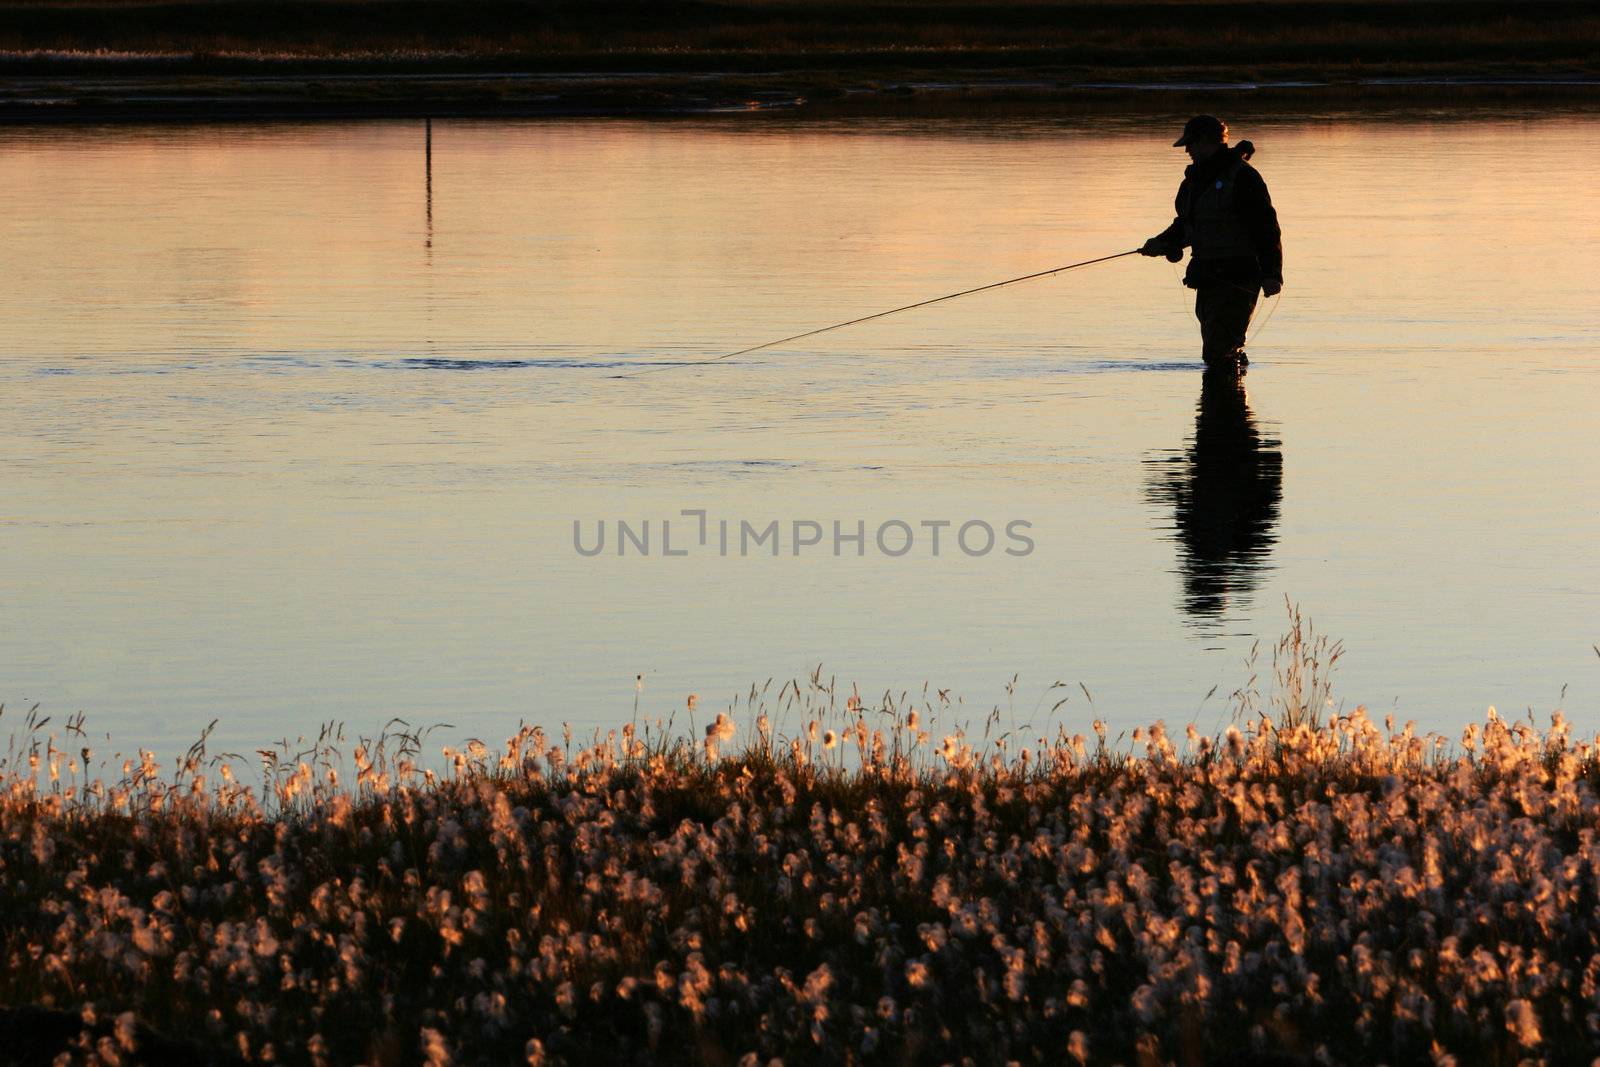  A man flyfishing in calm weather in twilight, sun lighting up the water and the near riverbank